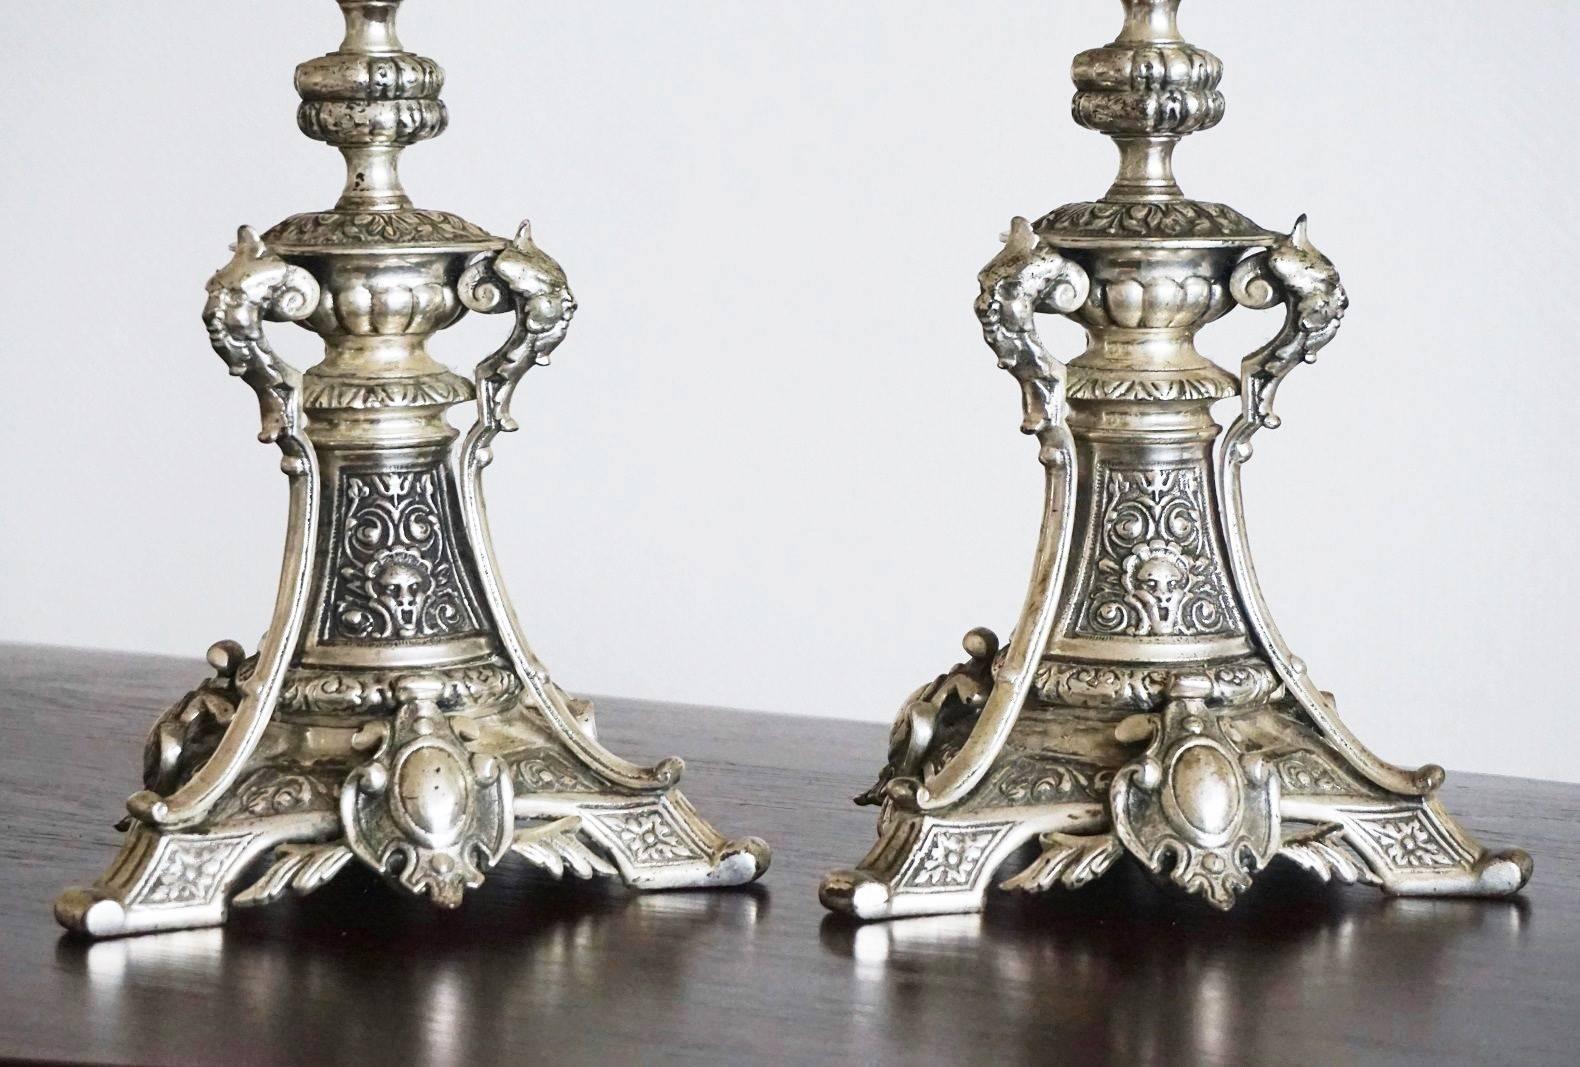 German 19th Century Pair of Silver Plated Candlesticks with Gothic Ornaments Candelabra